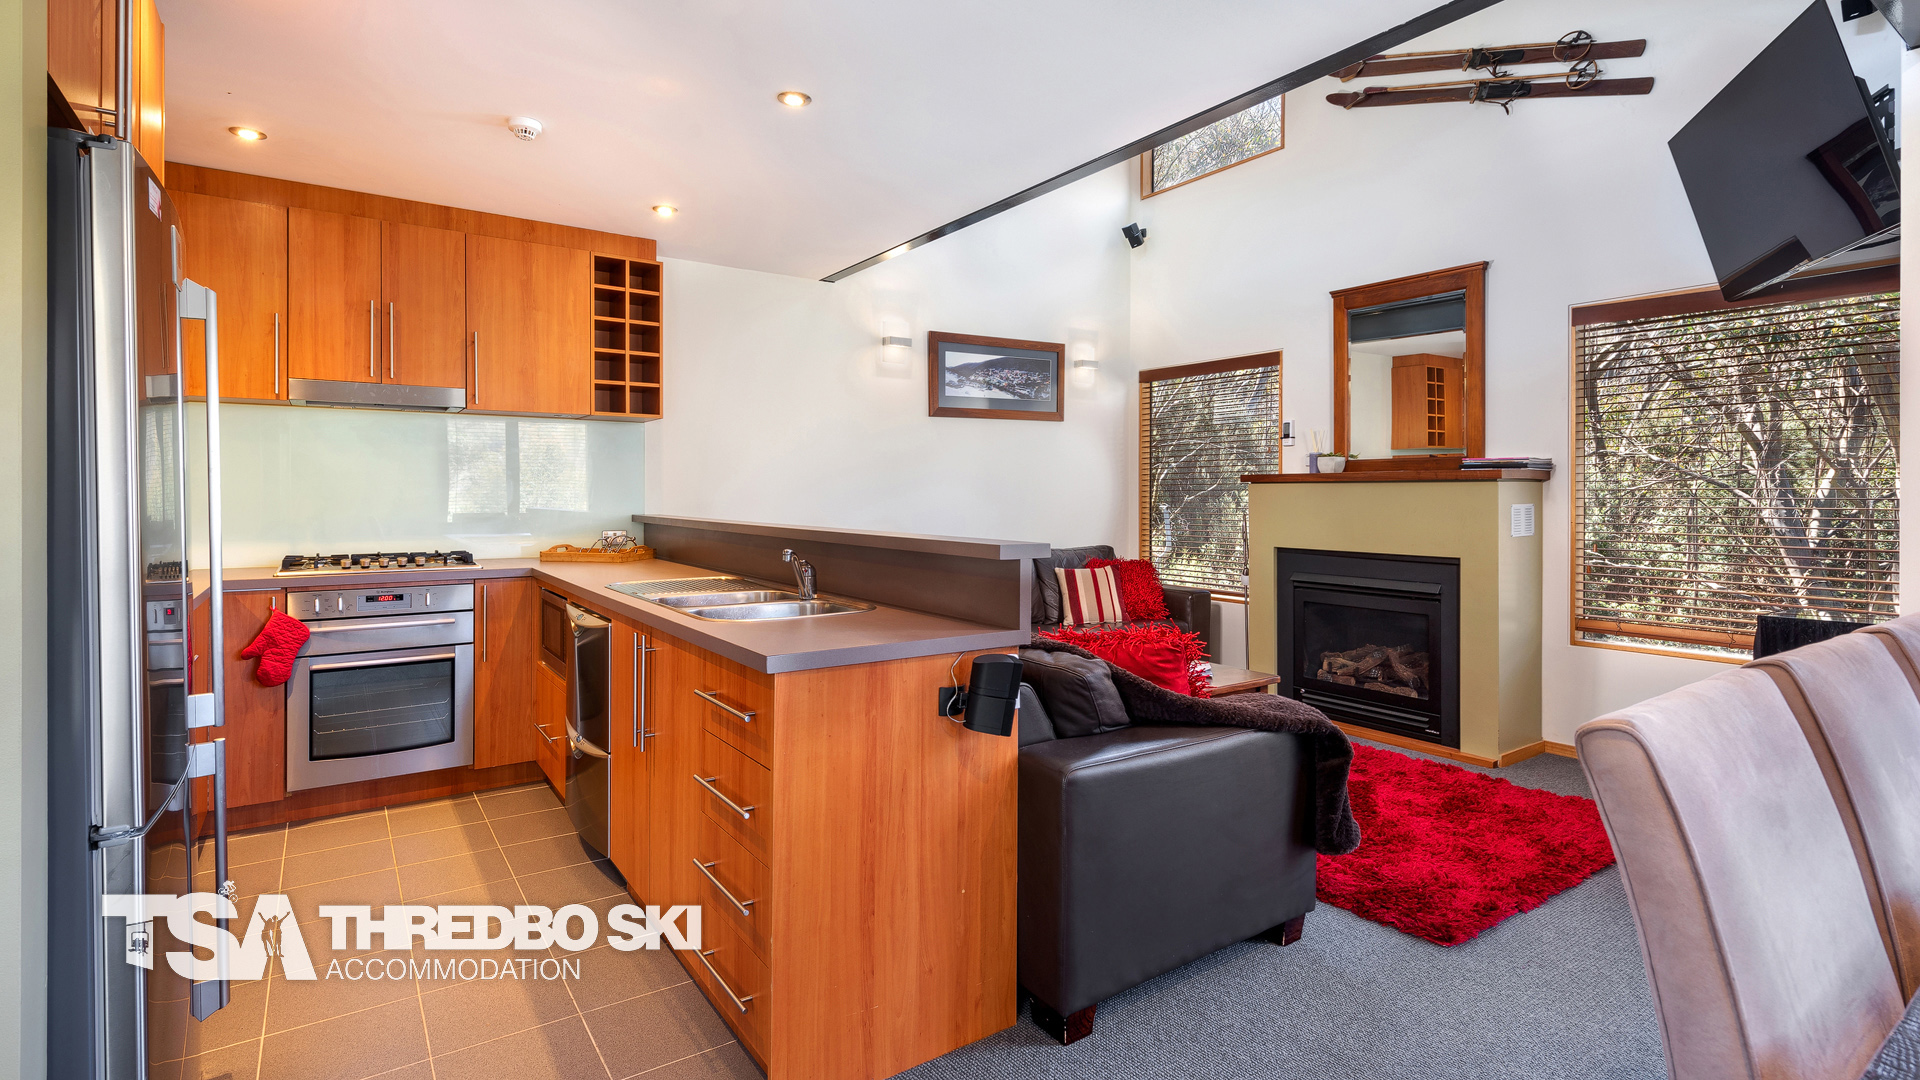 Fabulous 2 Bedroom & Loft Family Ski Chalet minutes from Crackenback Supertrail – Offers Invited over $2m